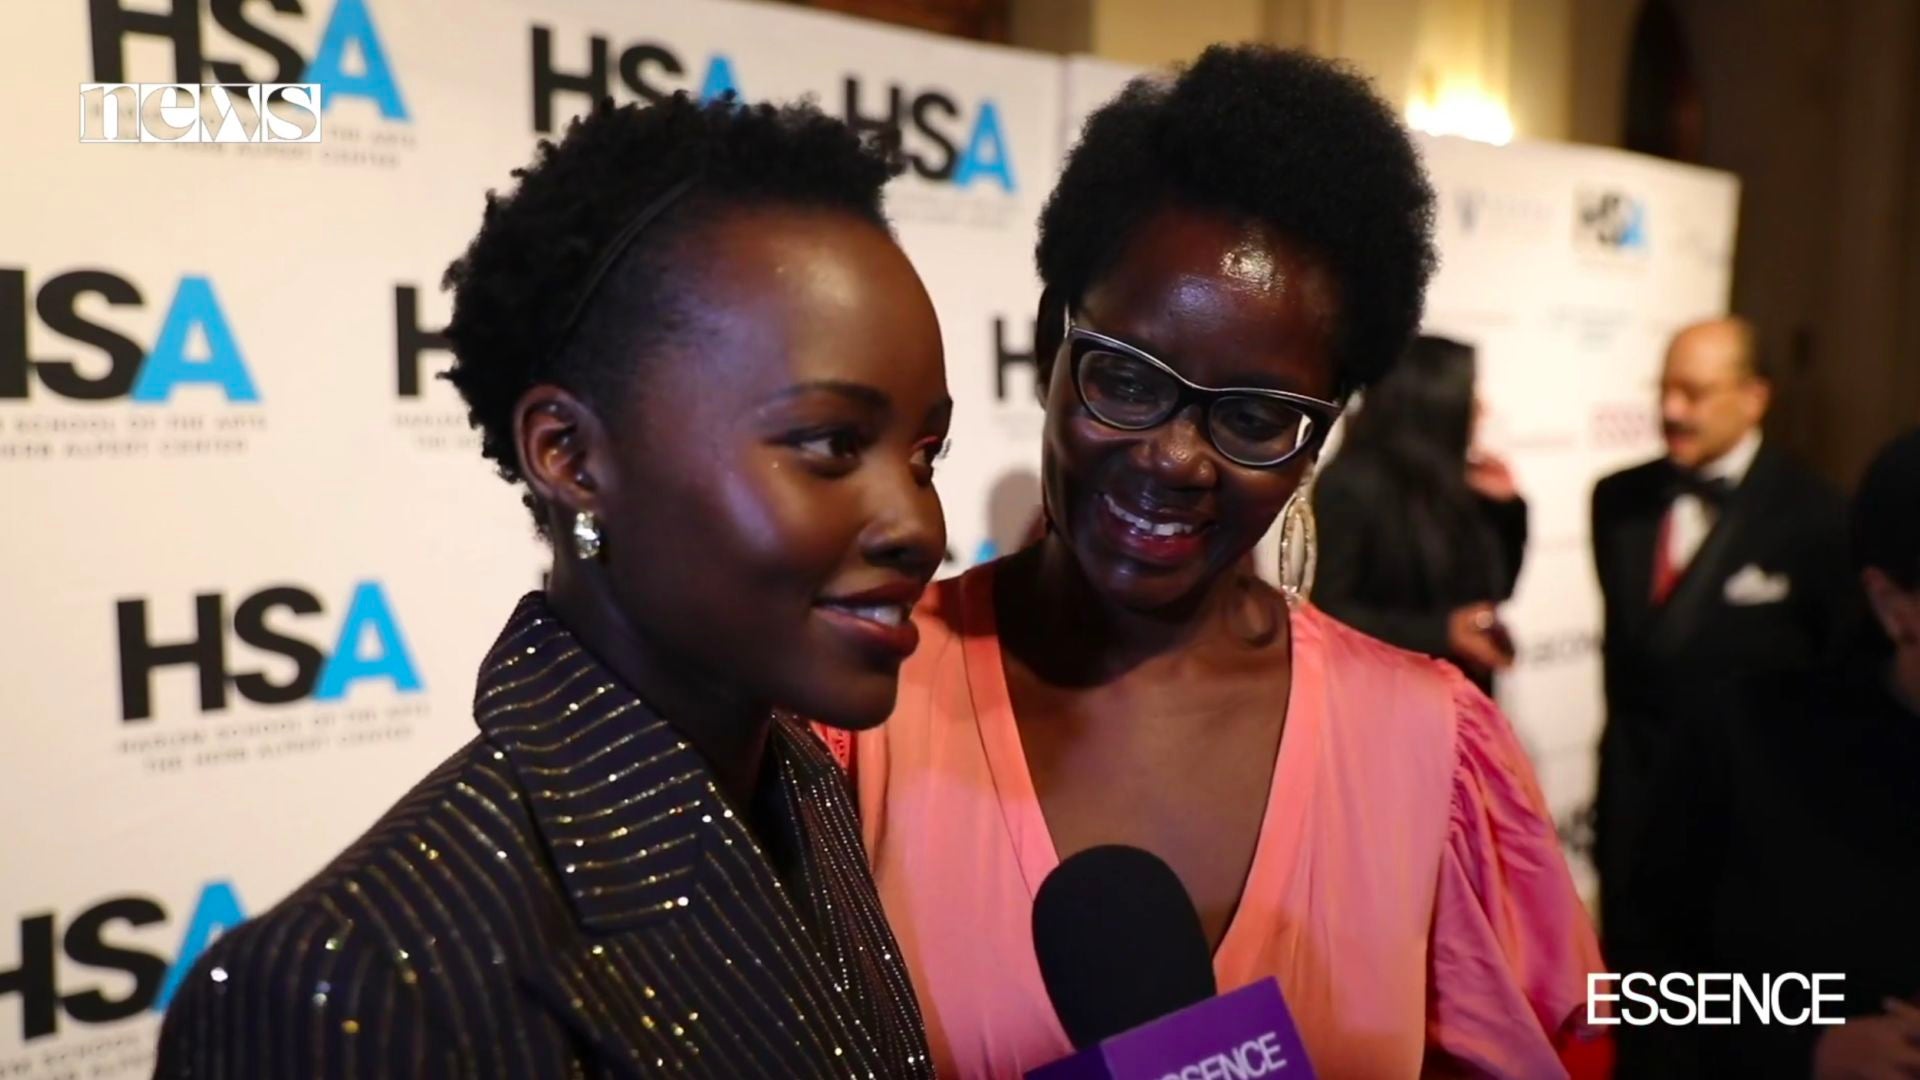 VIDEO: This Beautiful Moment With Lupita Nyong'o And Her Mom On The Red Carpet Will Make Your Day